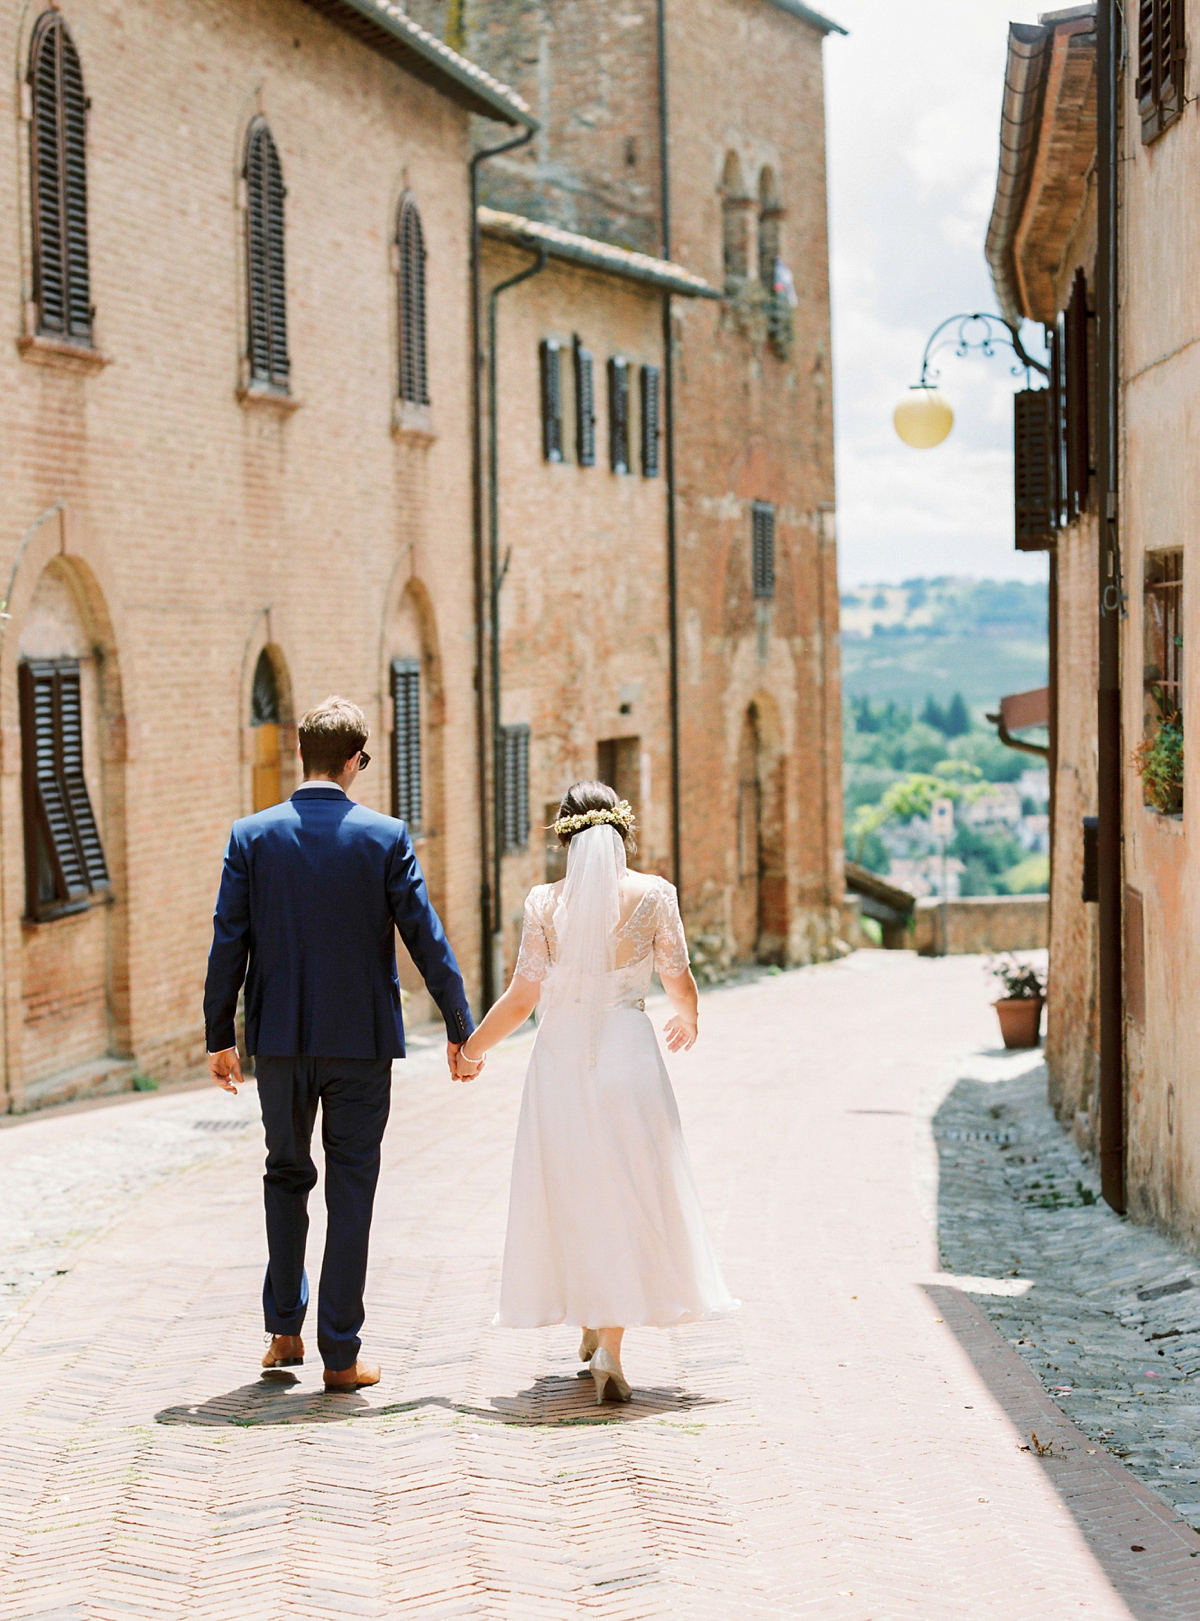 Our Lovettes member and bride Kate wore a 1950's inspired short gown for her wedding in the rural Italian countryside. Photography by Gert Huygaerts.